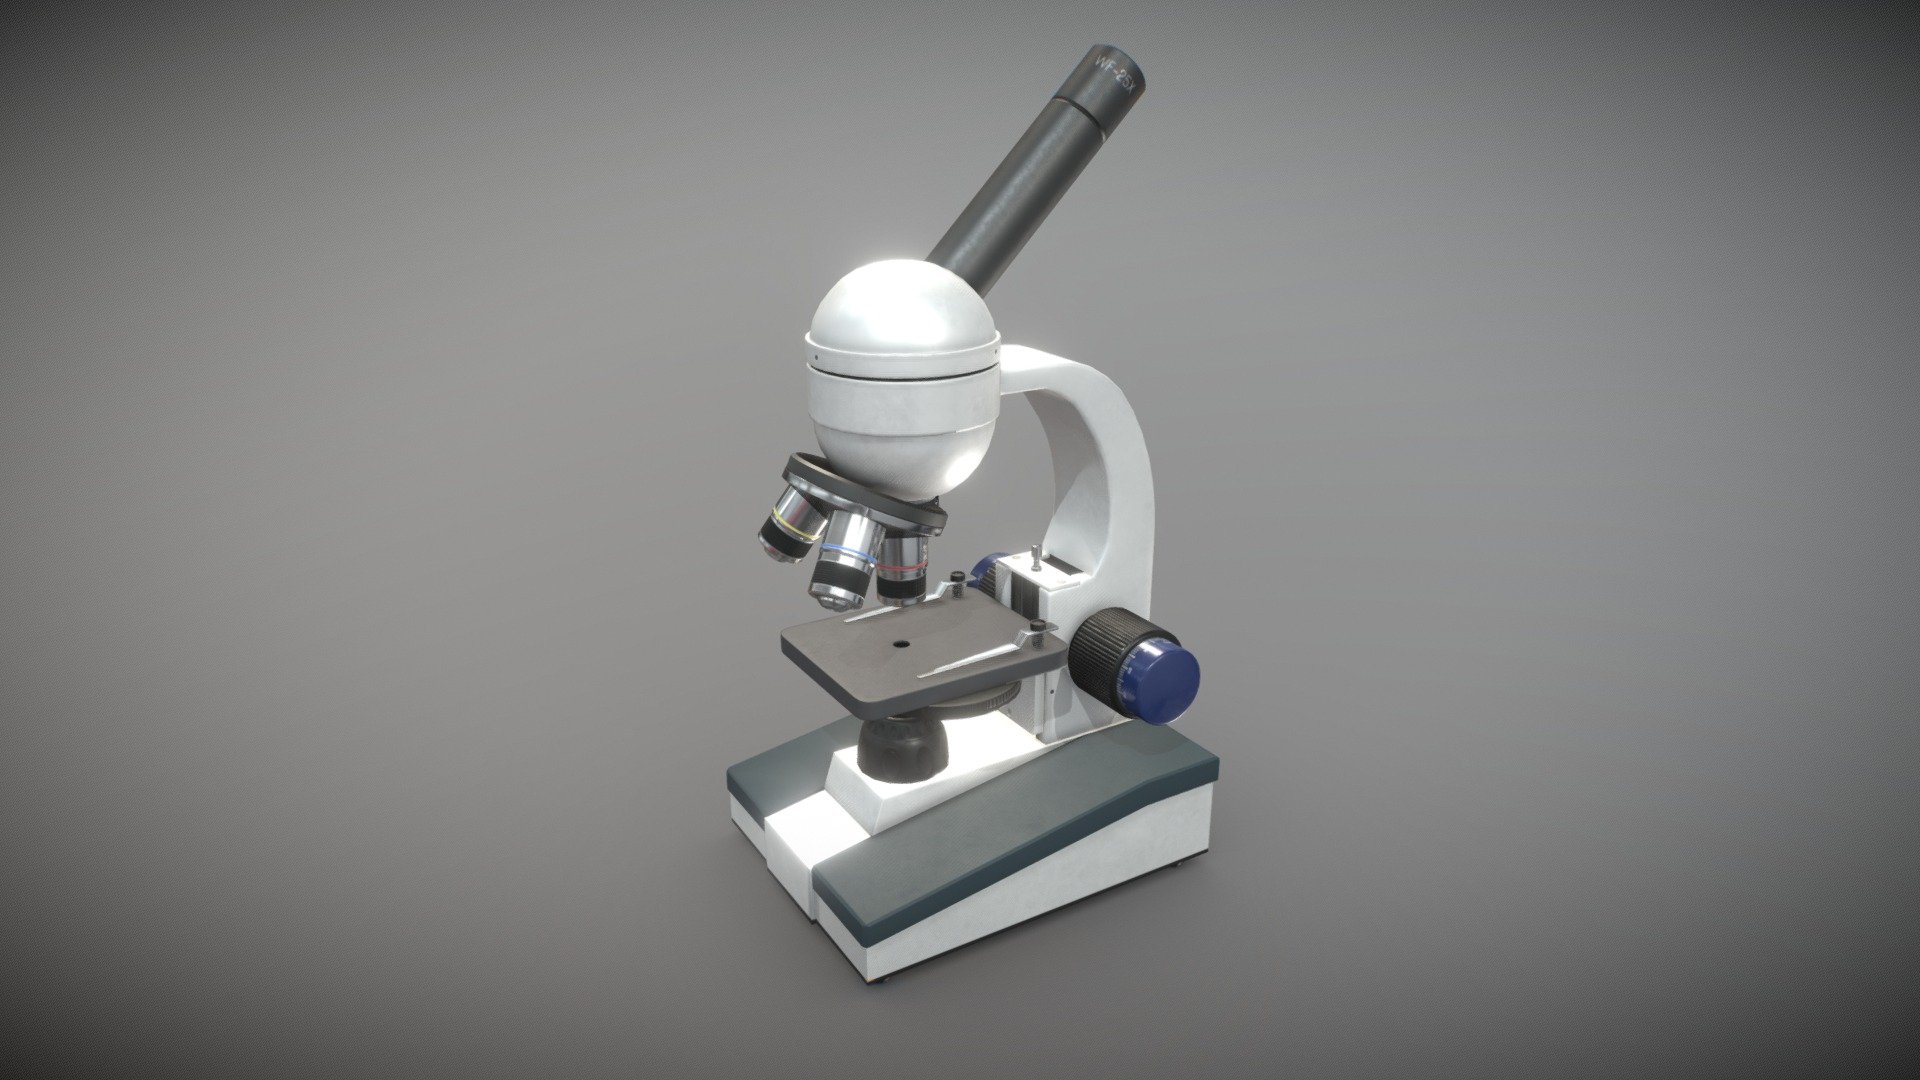 Biological microscope model
For games
Reference is AmScope M150C-I

Modelled in 3ds max and Mudbox
Painted in Substance Painter - Microscope - Download Free 3D model by Eugen Vahrushin (@eugen_vahrushin) 3d model